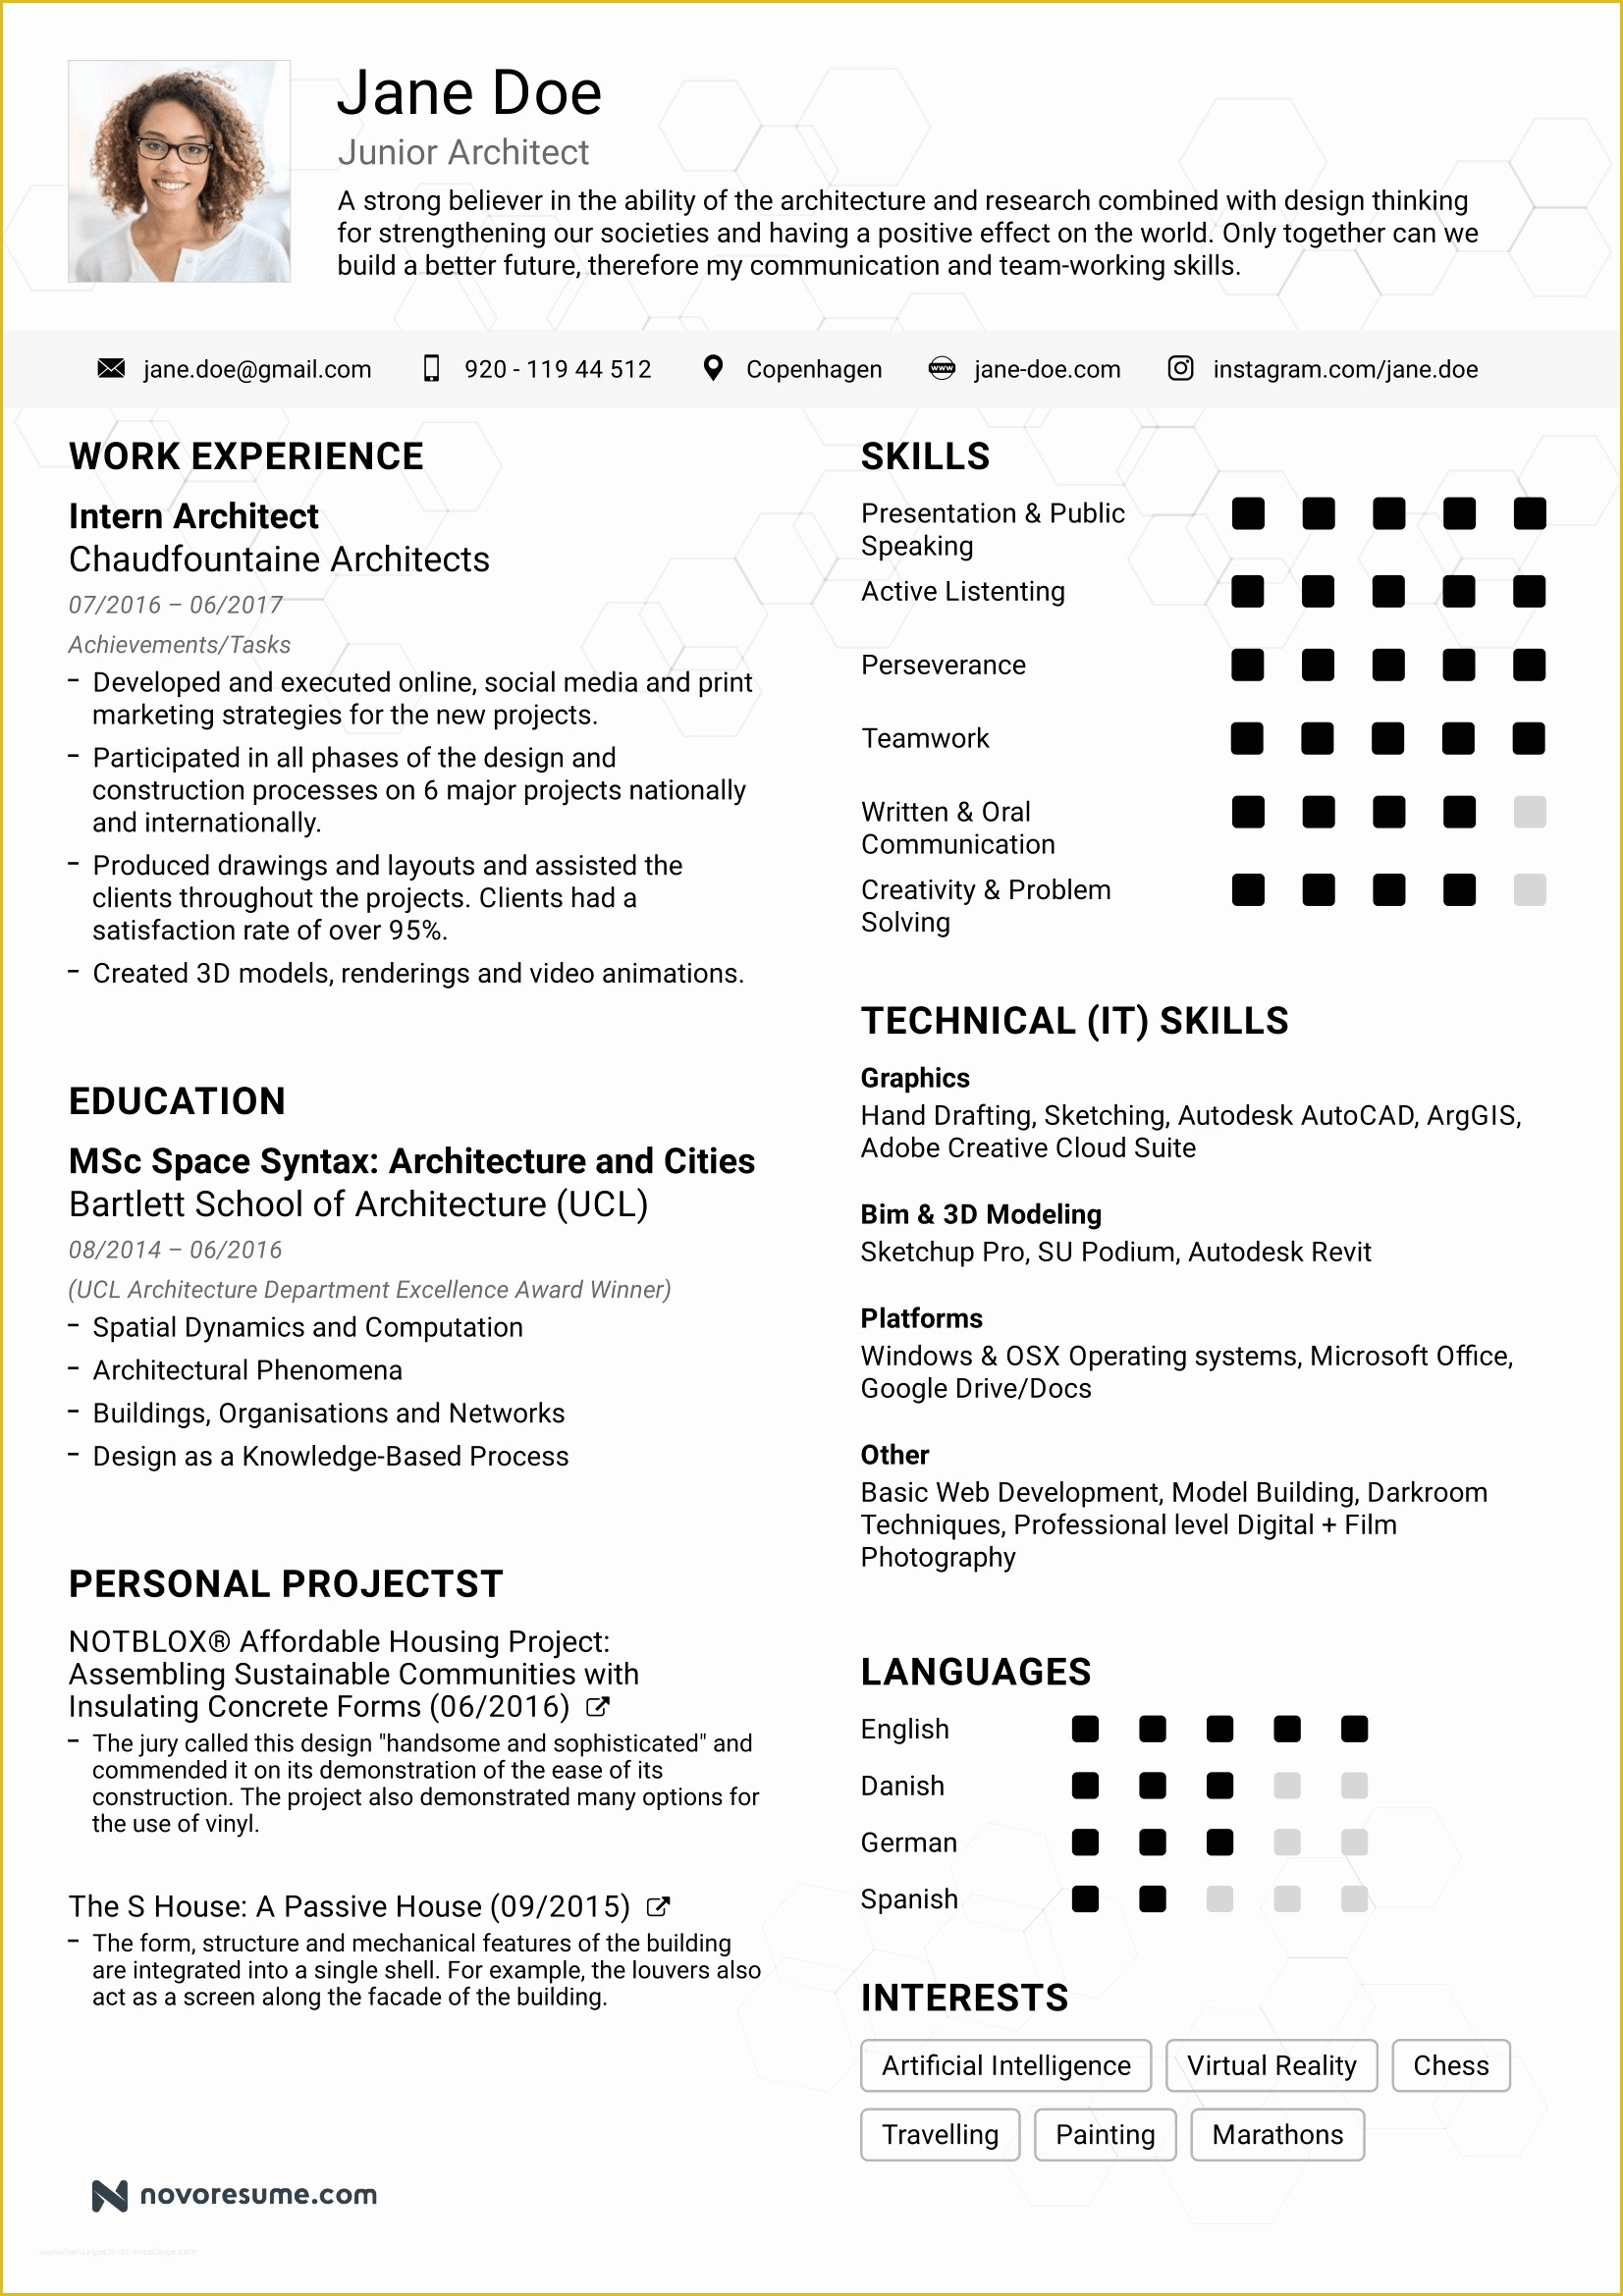 Free Business Resume Template 2018 Of Resume Examples for Your 2019 Job Application